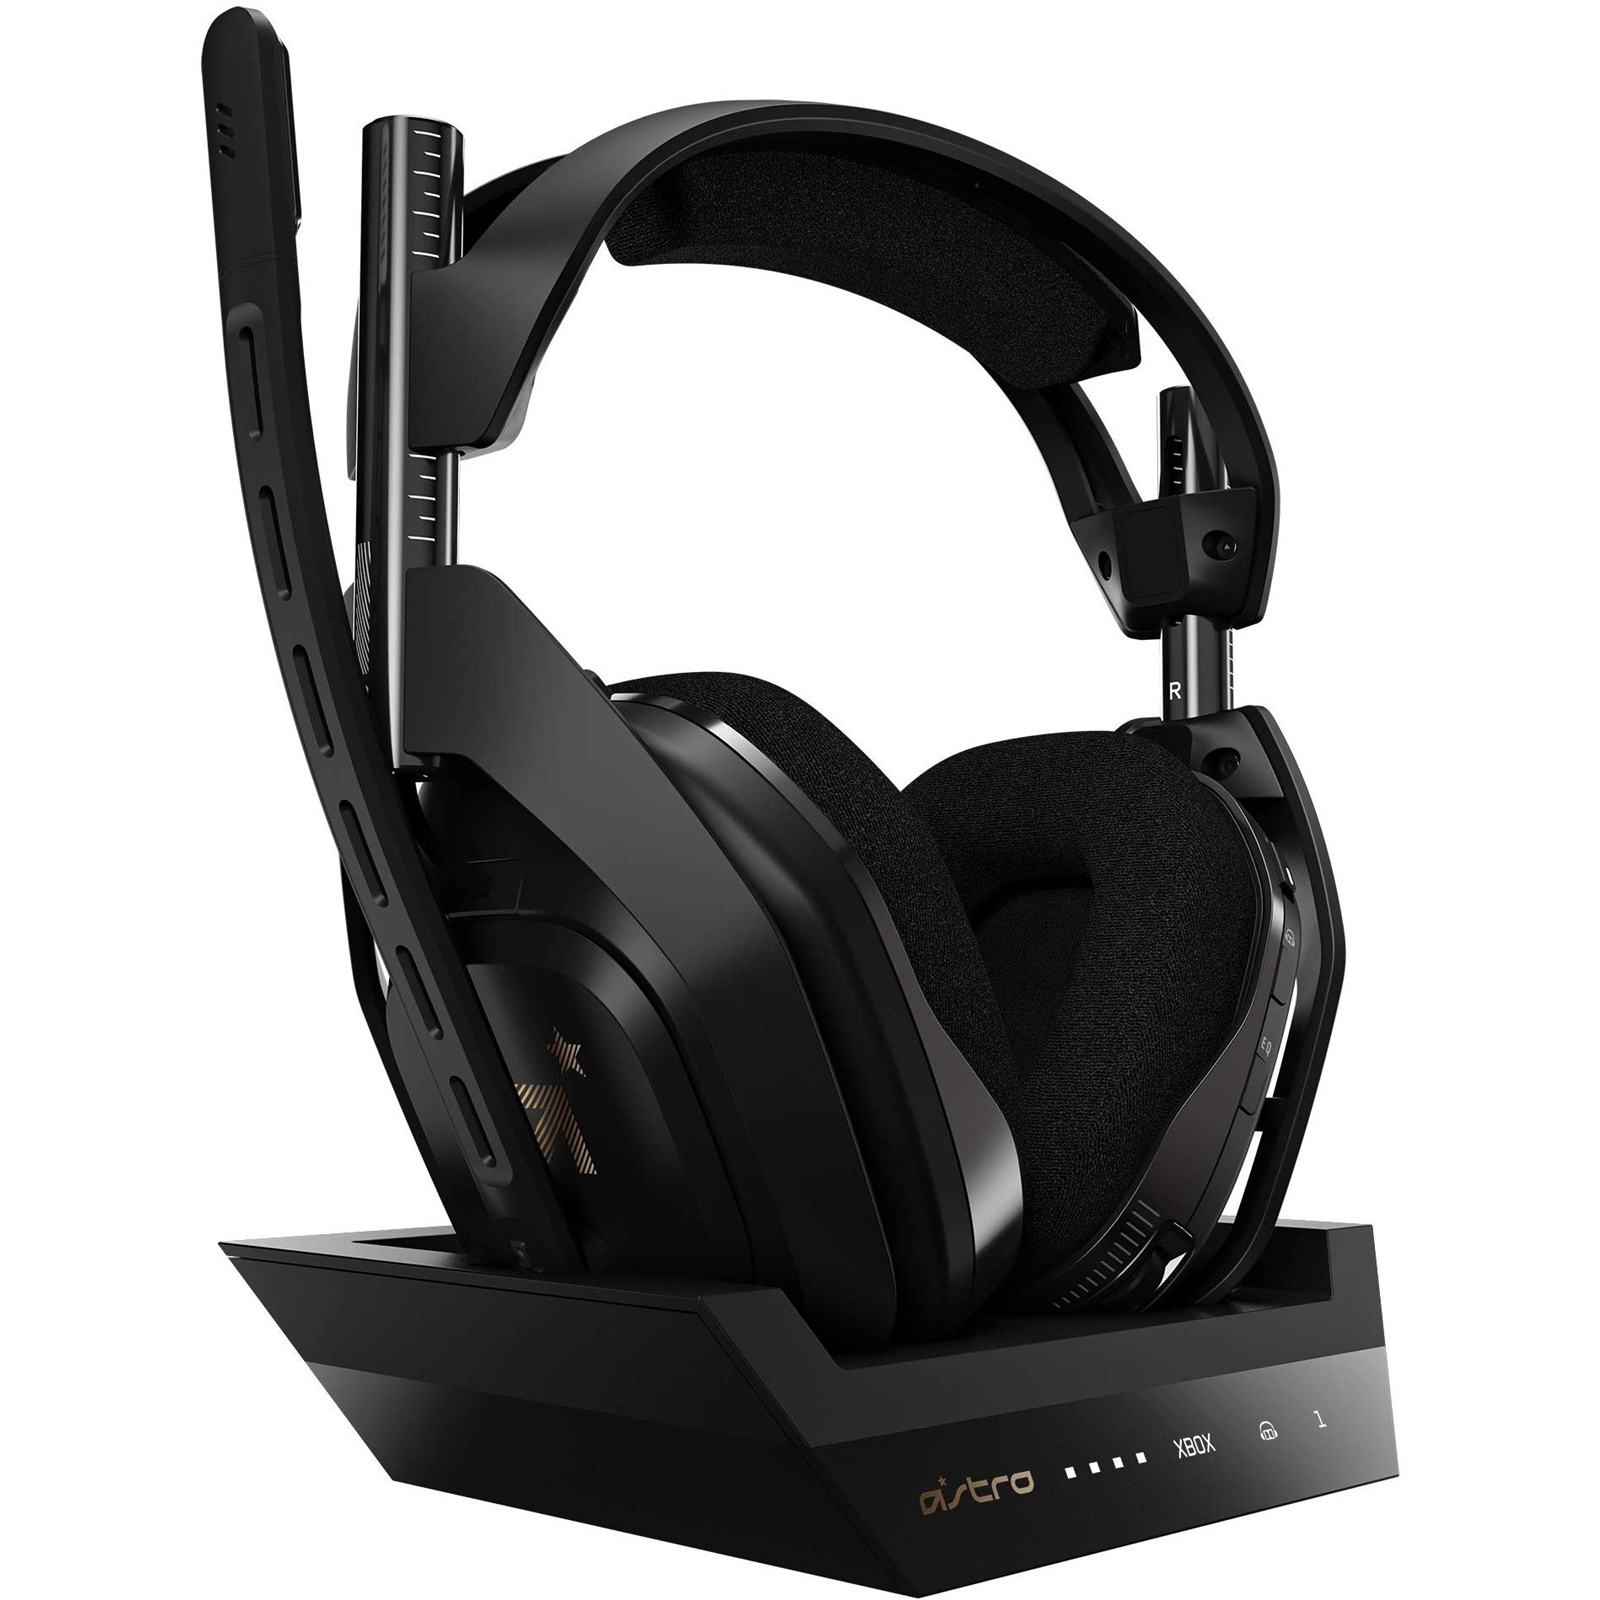 Astro A50 Wireless Gaming Headset For Xbox One, PC & Mac, Discord... ( 939-001680 ) online - PBTech.com/au